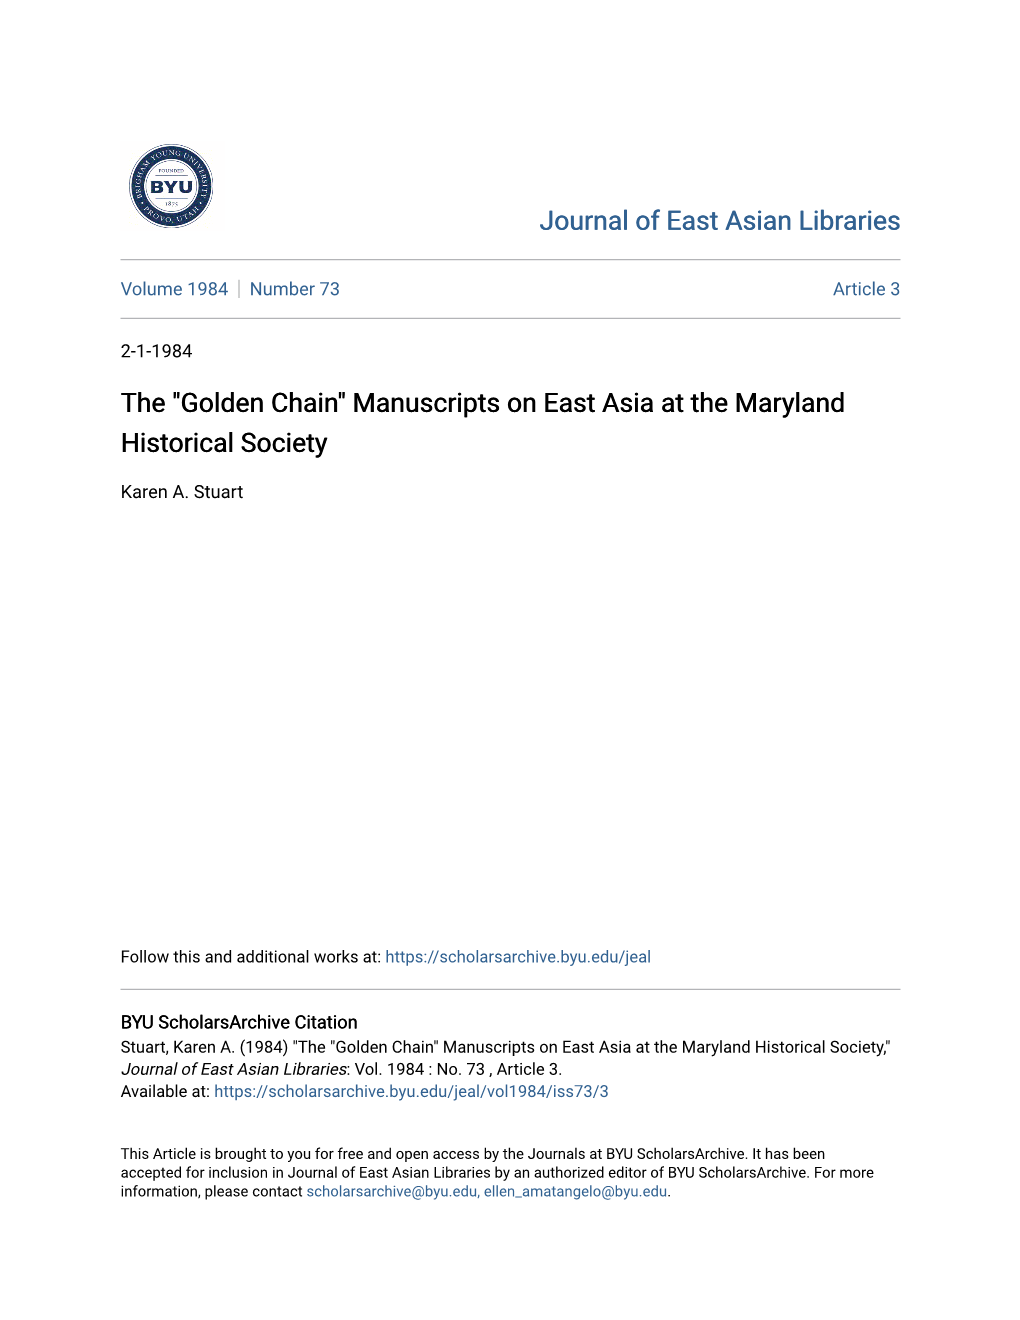 Manuscripts on East Asia at the Maryland Historical Society